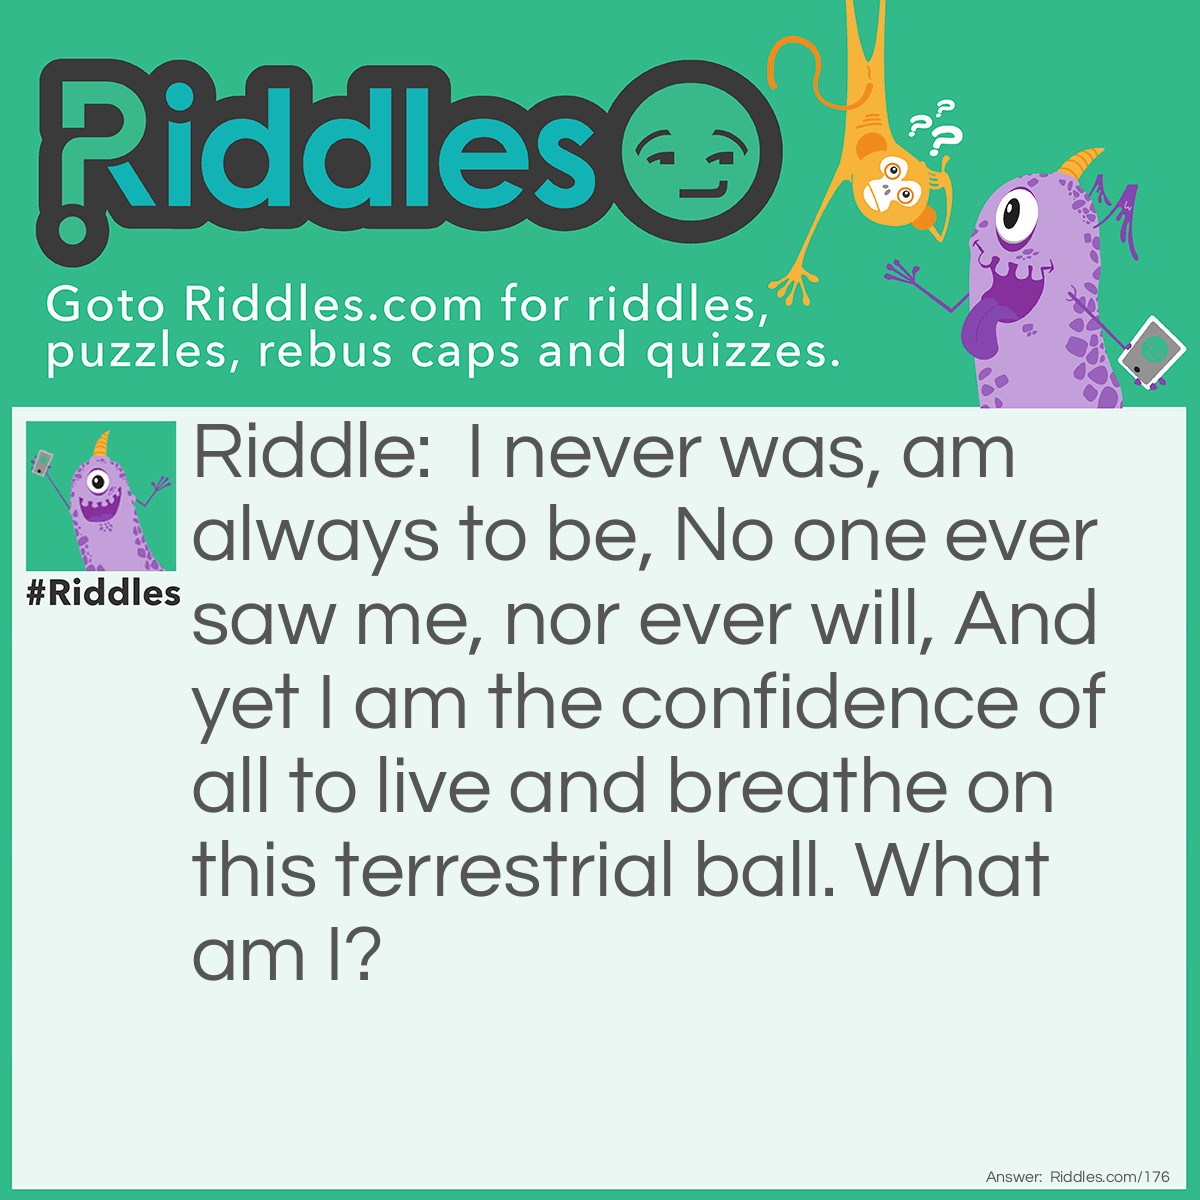 Riddle: I never was, am always to be, No one ever saw me, nor ever will, And yet I am the confidence of all to live and breathe on this terrestrial ball. What am I? Answer: Tomorrow.